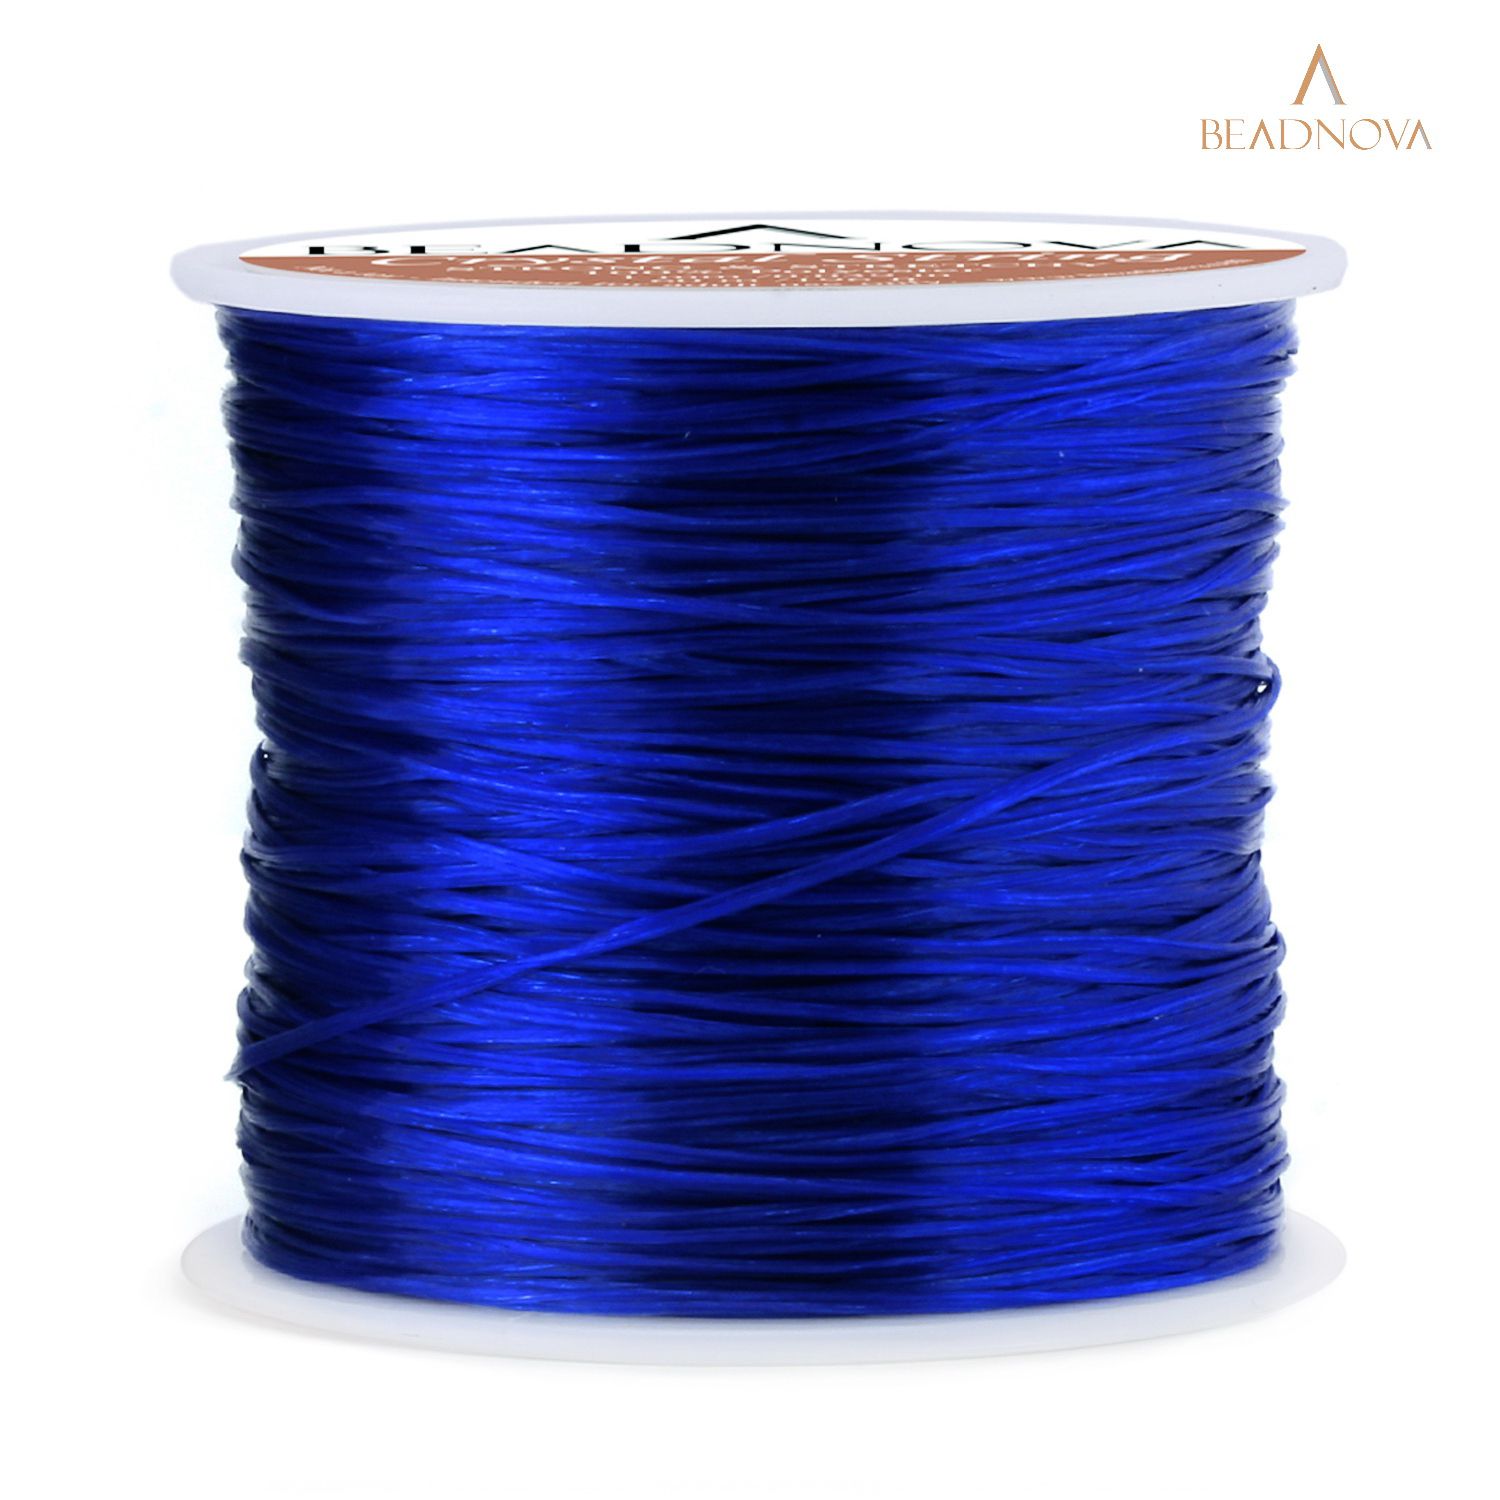 BEADNOVA 1mm Elastic Stretch Polyester Crystal String Cord for